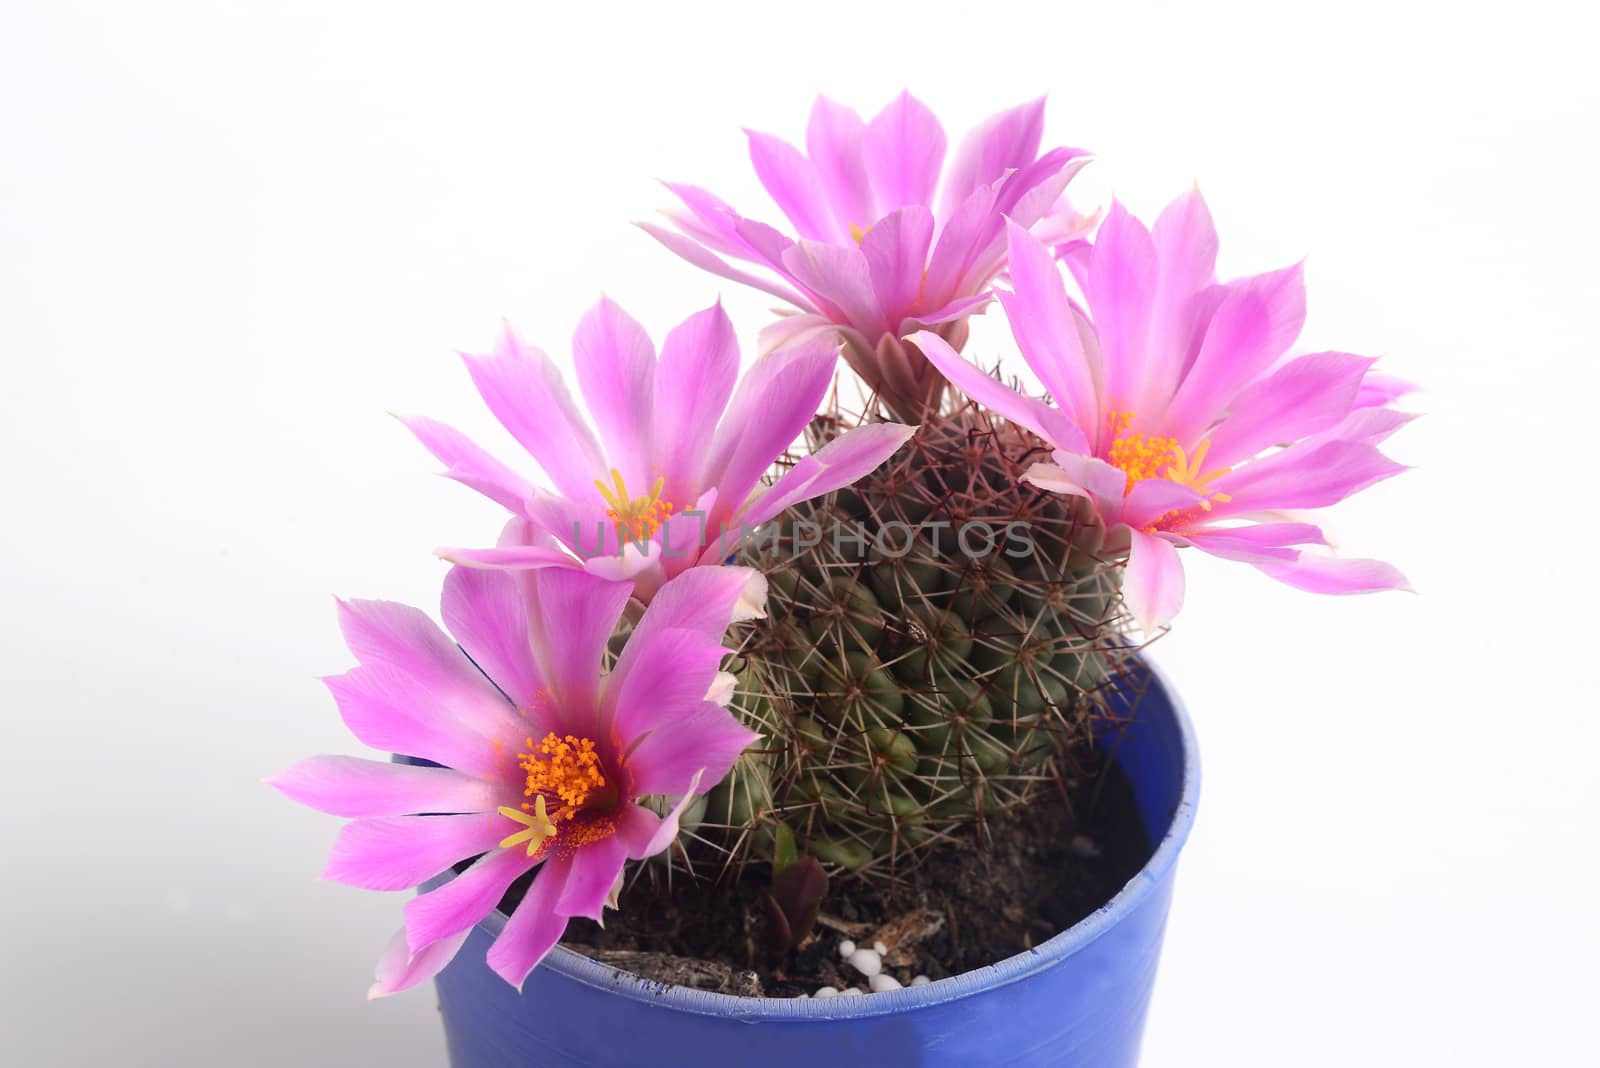 Blooming pink  flower of Mammillaria schumannii  cactus on  white  background by ideation90